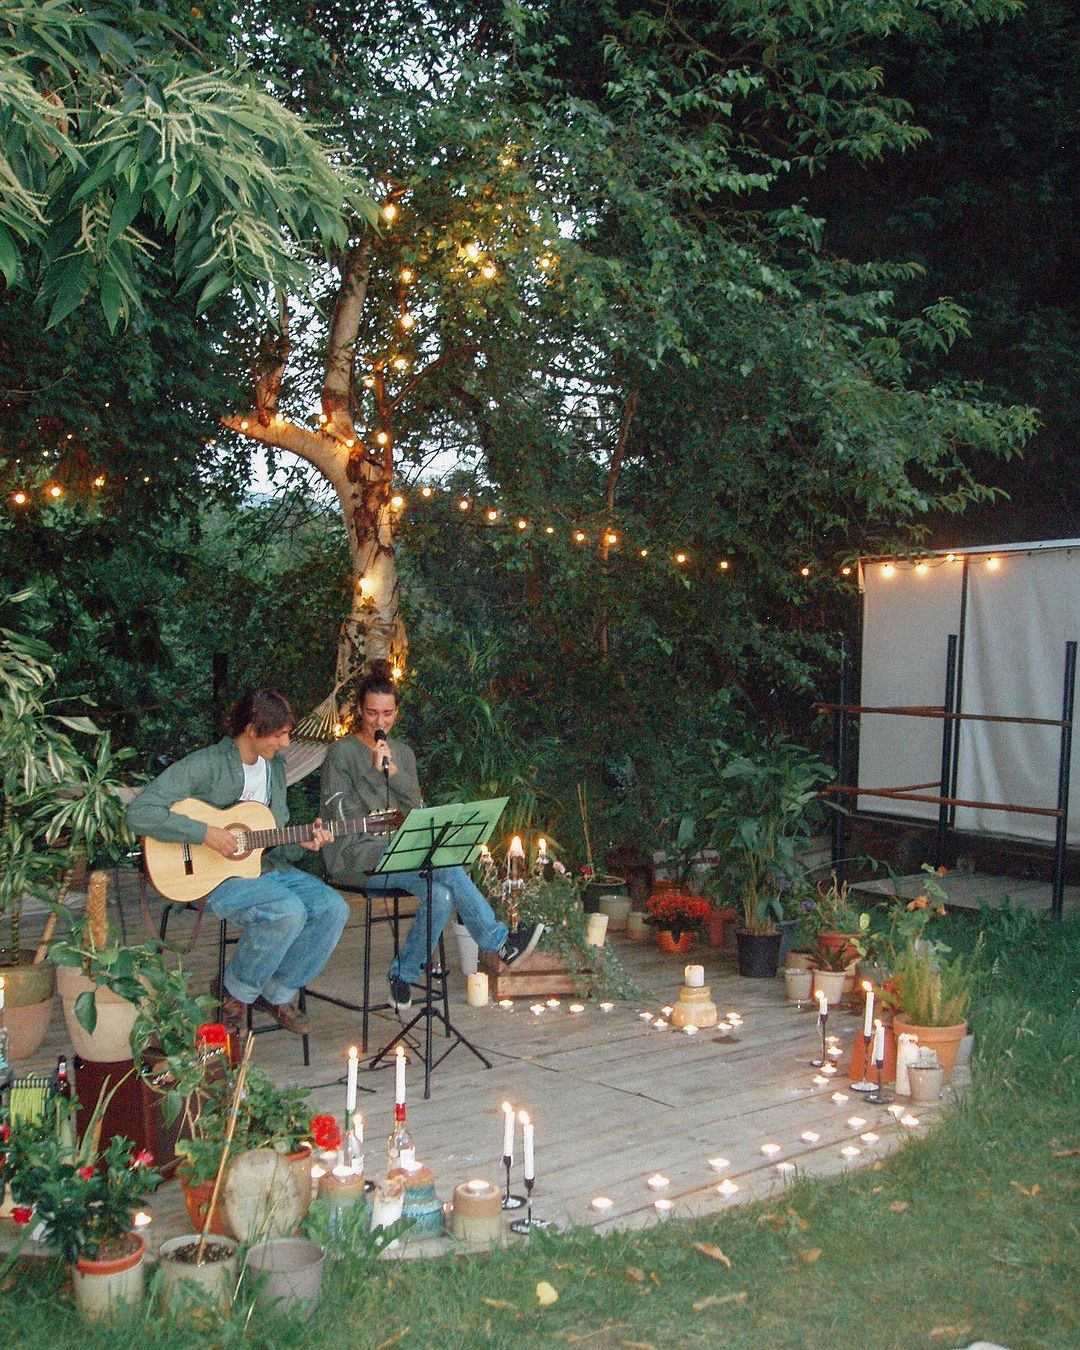 Guitar player and singer surrounded by candles in the outdoor space of Amigos Surf camp in Cantabria.